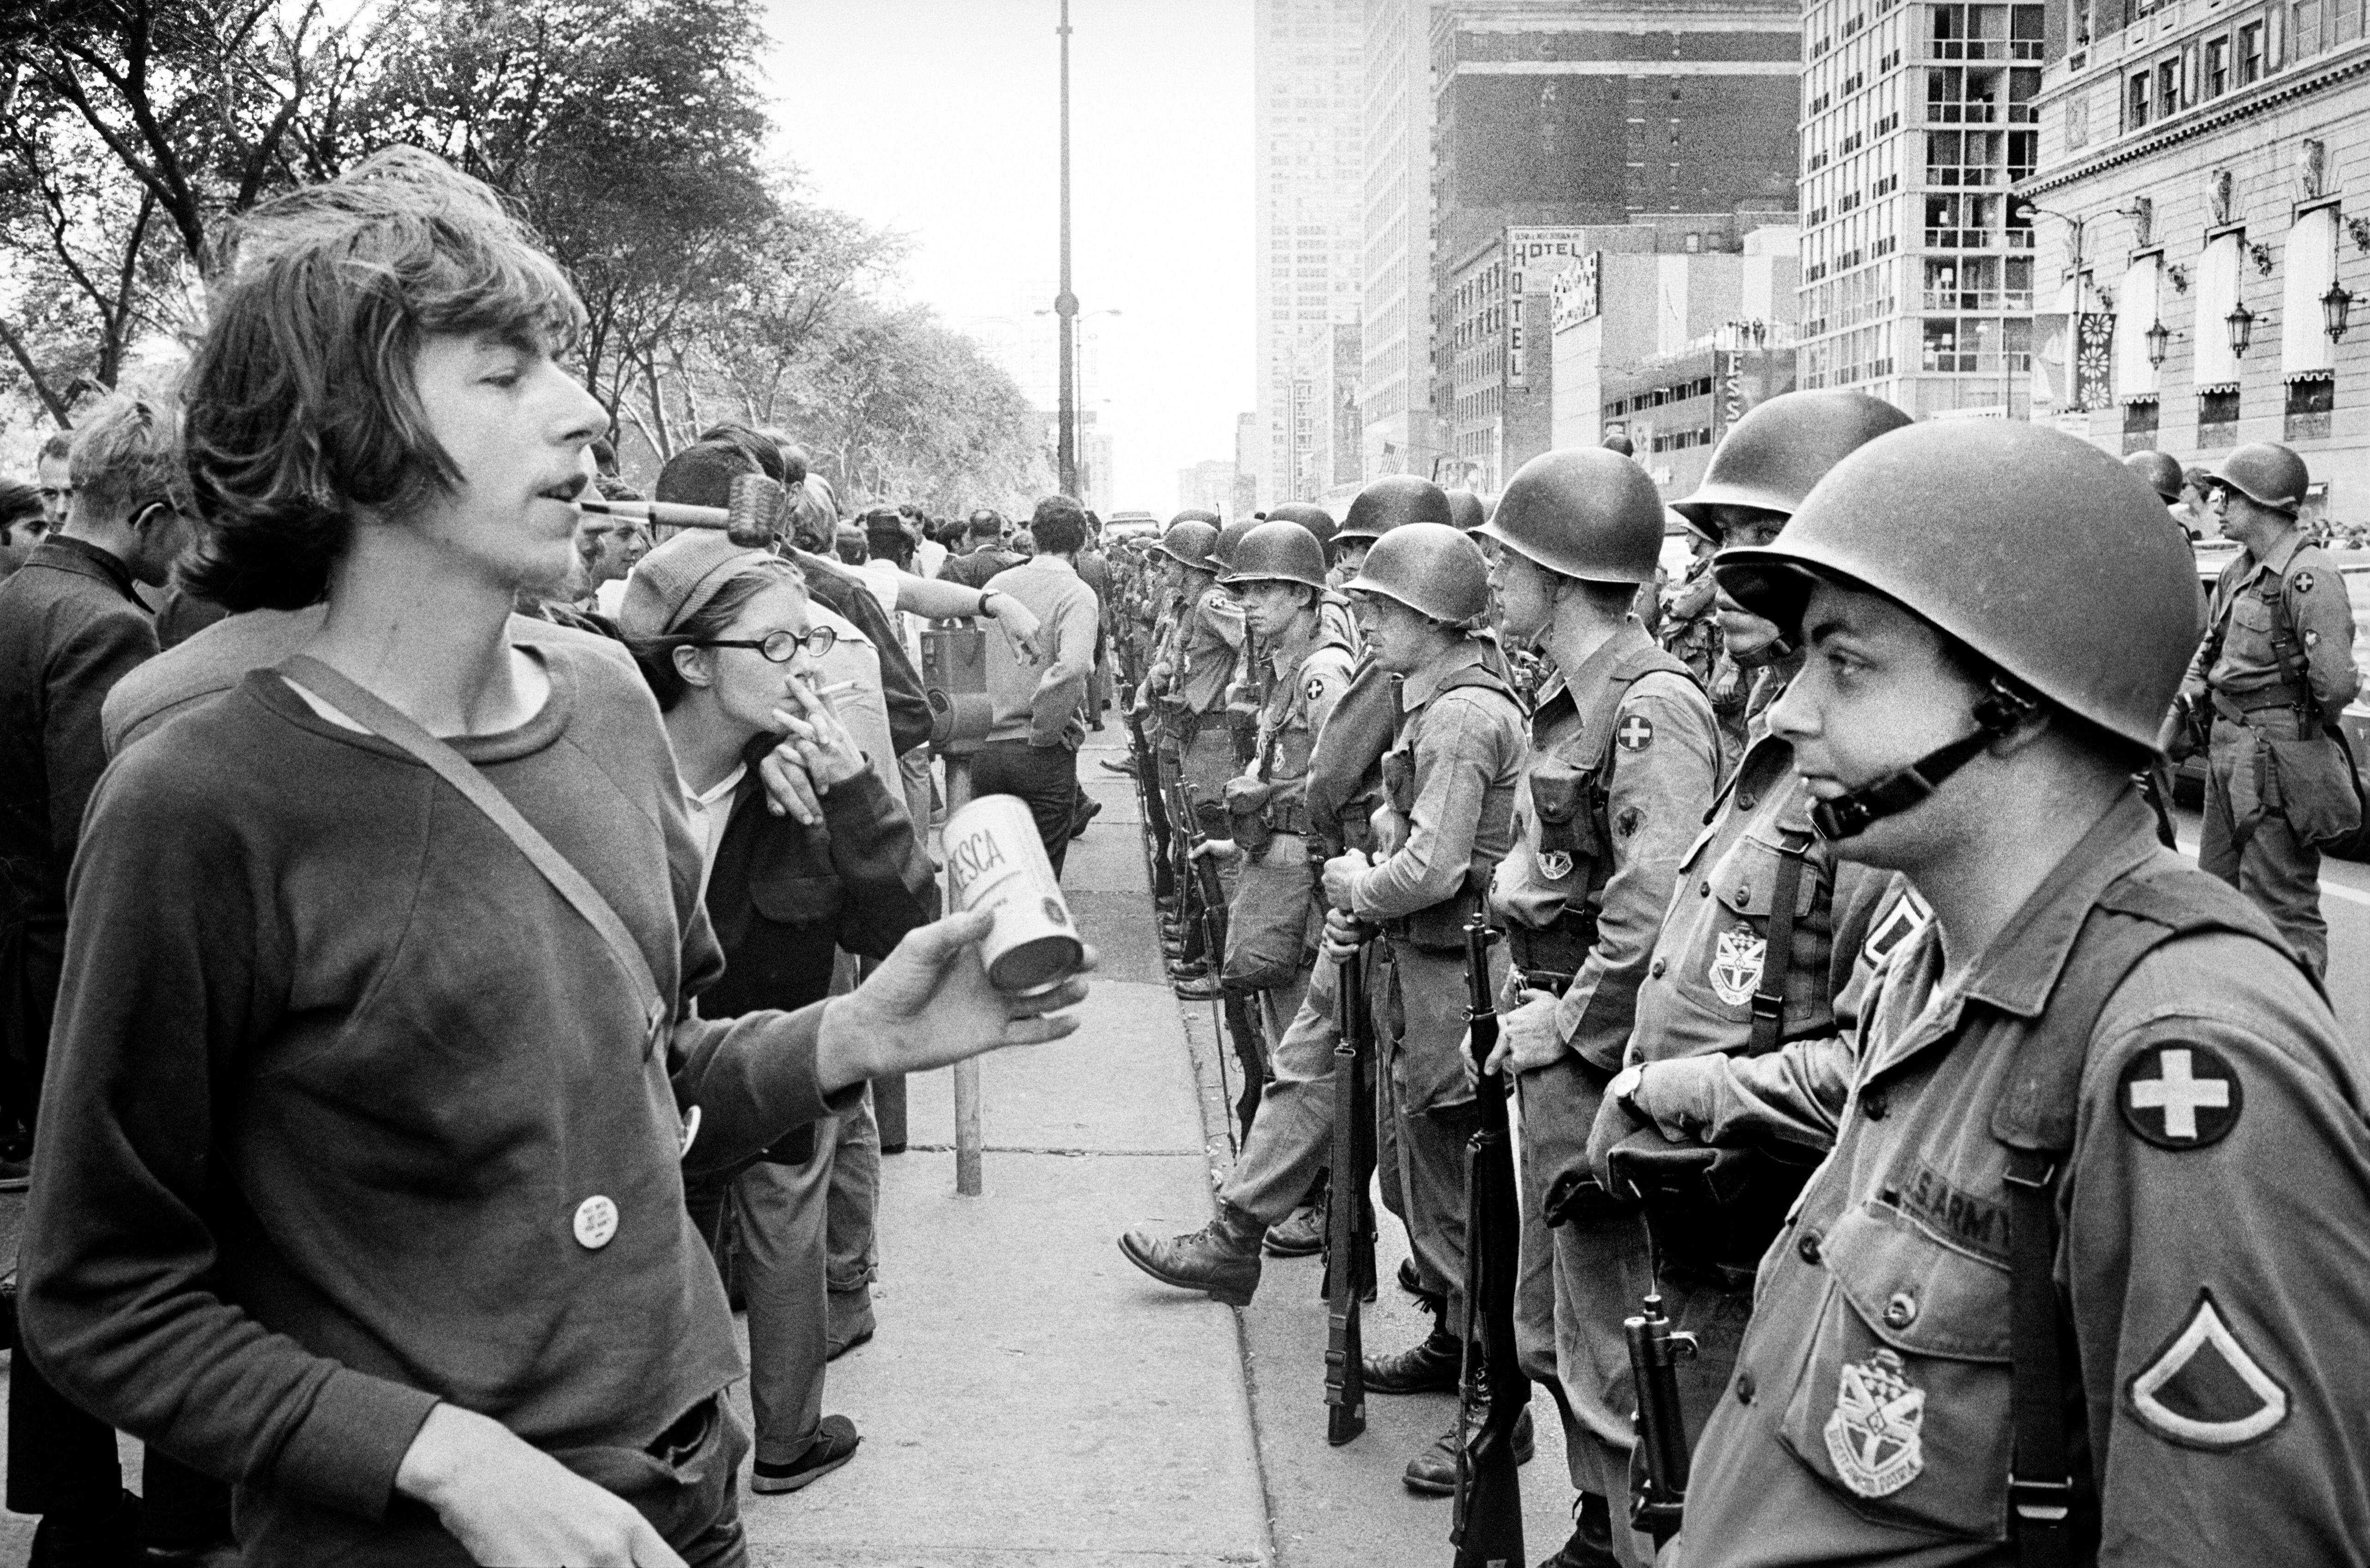 National Guard soldiers come up against protesters outside the Democratic National Convention in Illinois in 1968